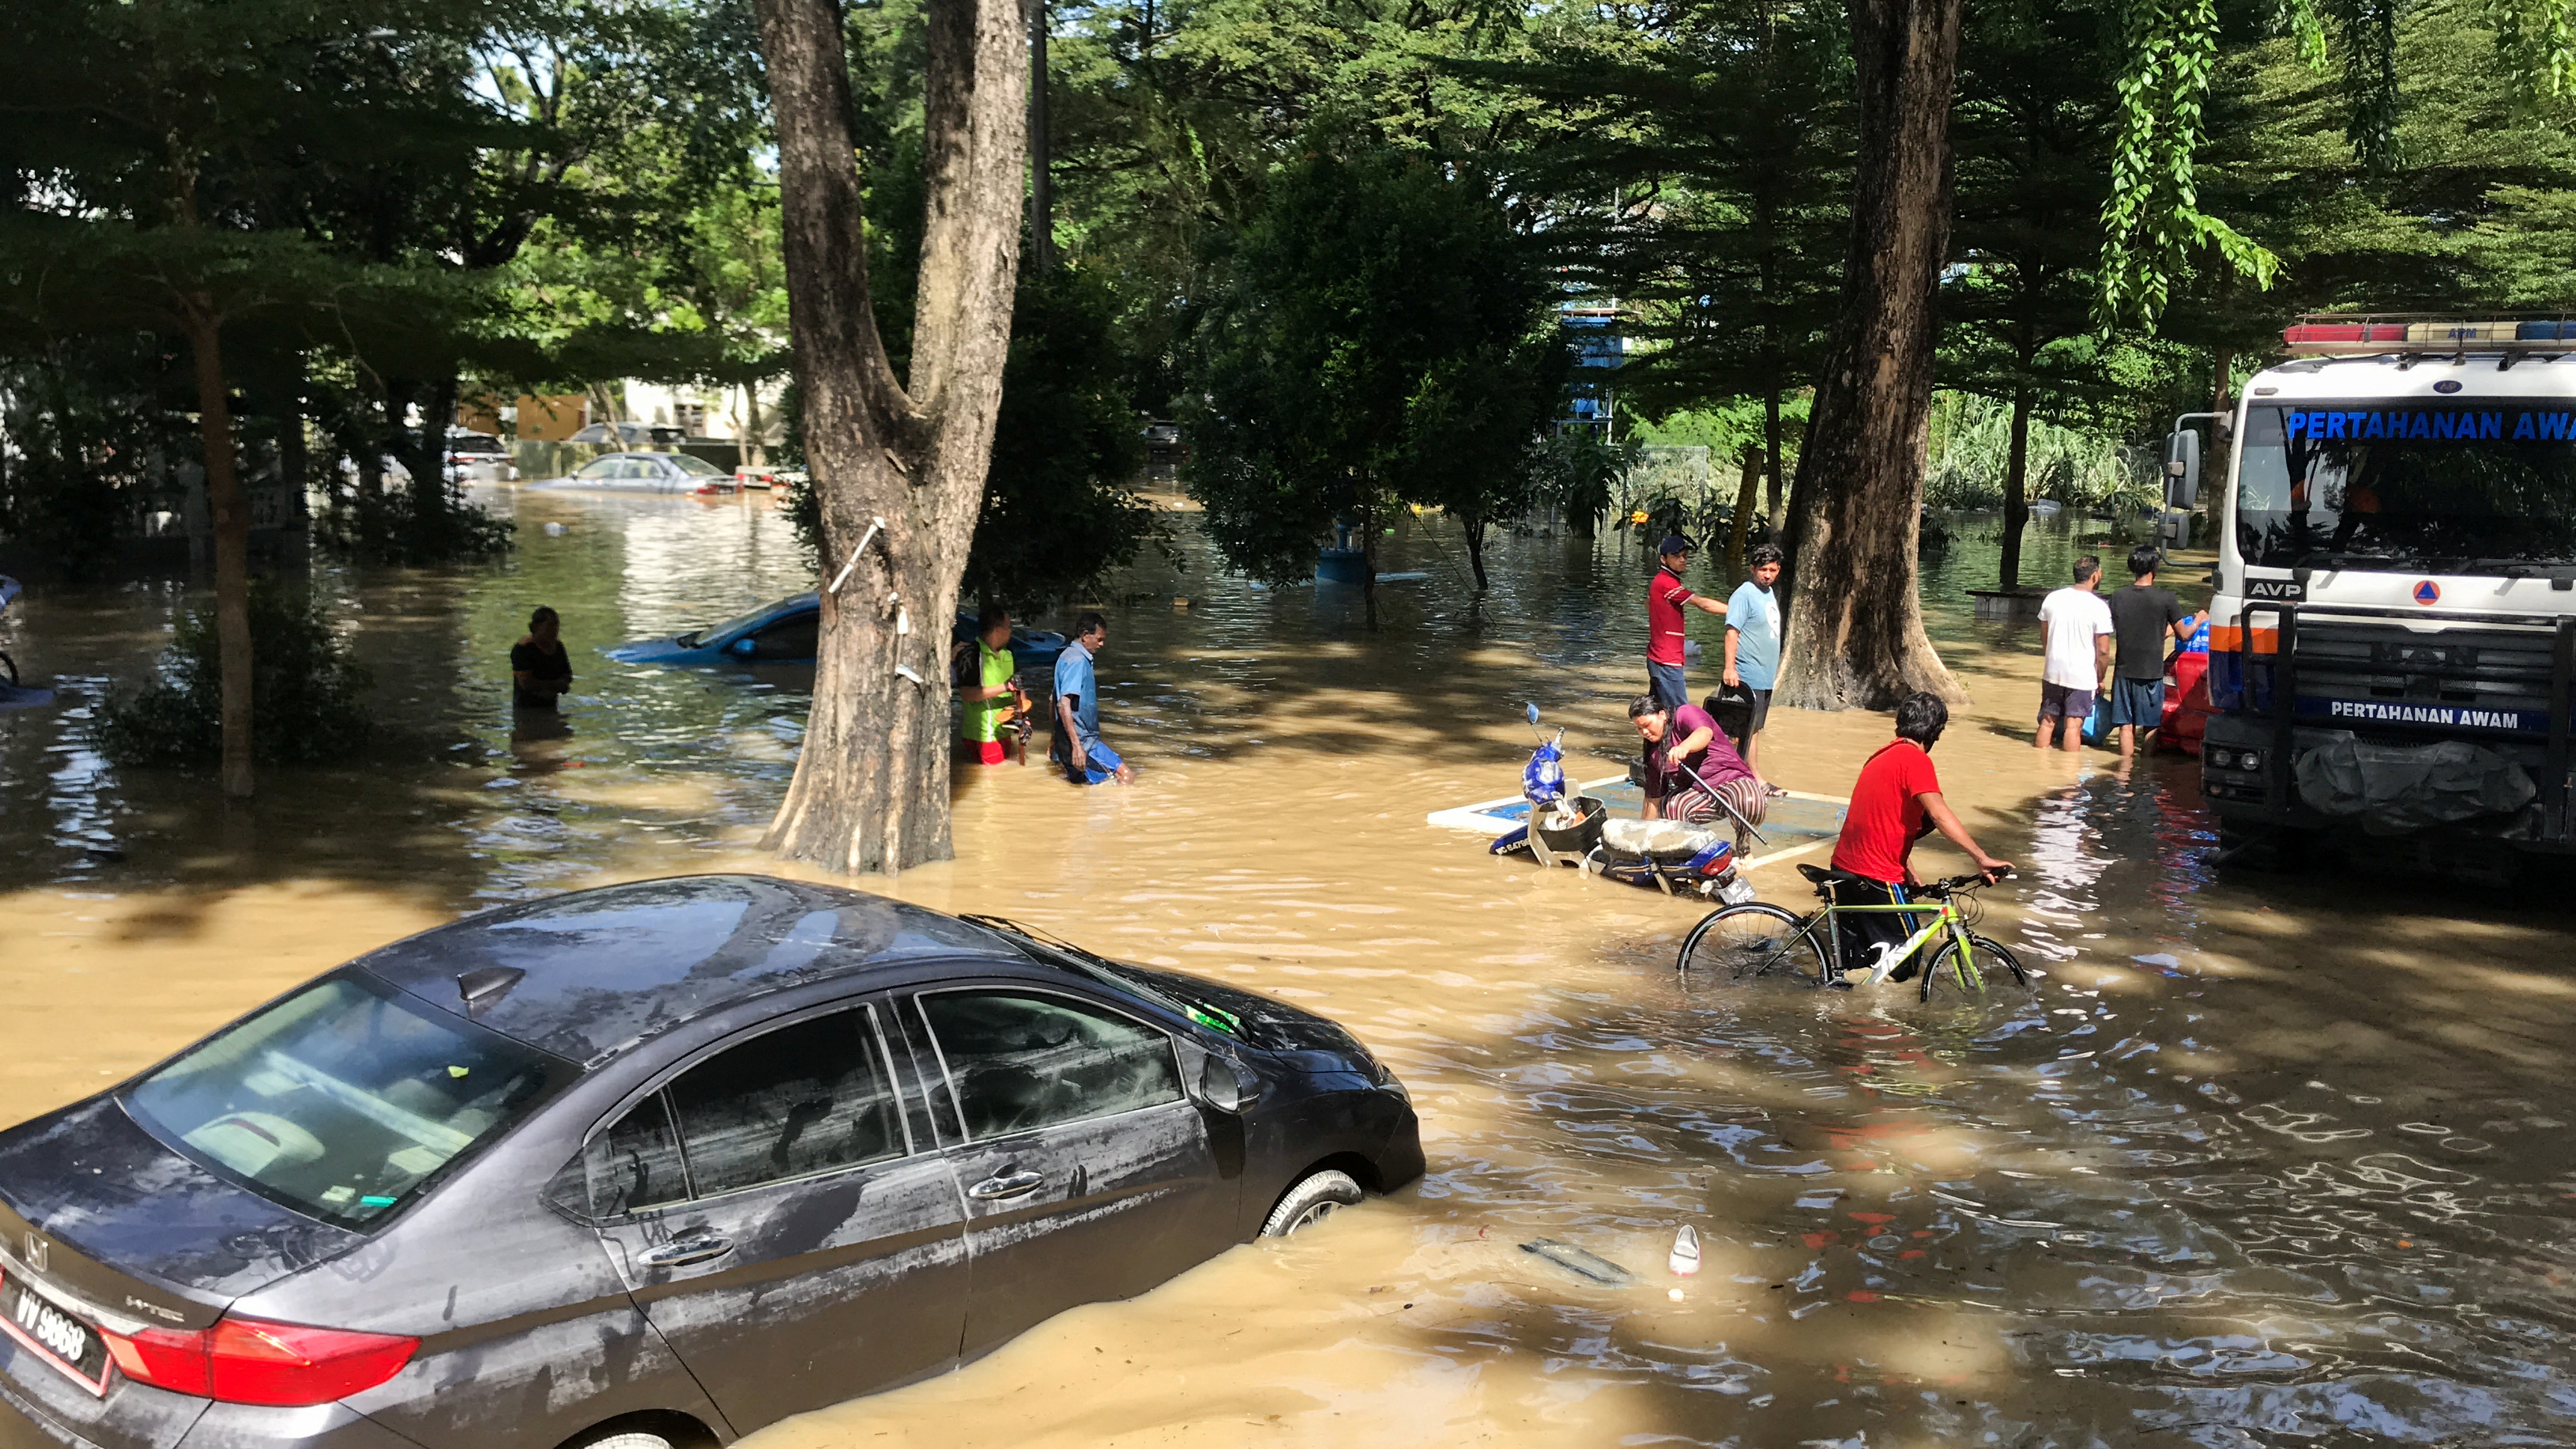 People wade among partially submerged vehicles through flood waters in Shah Alam